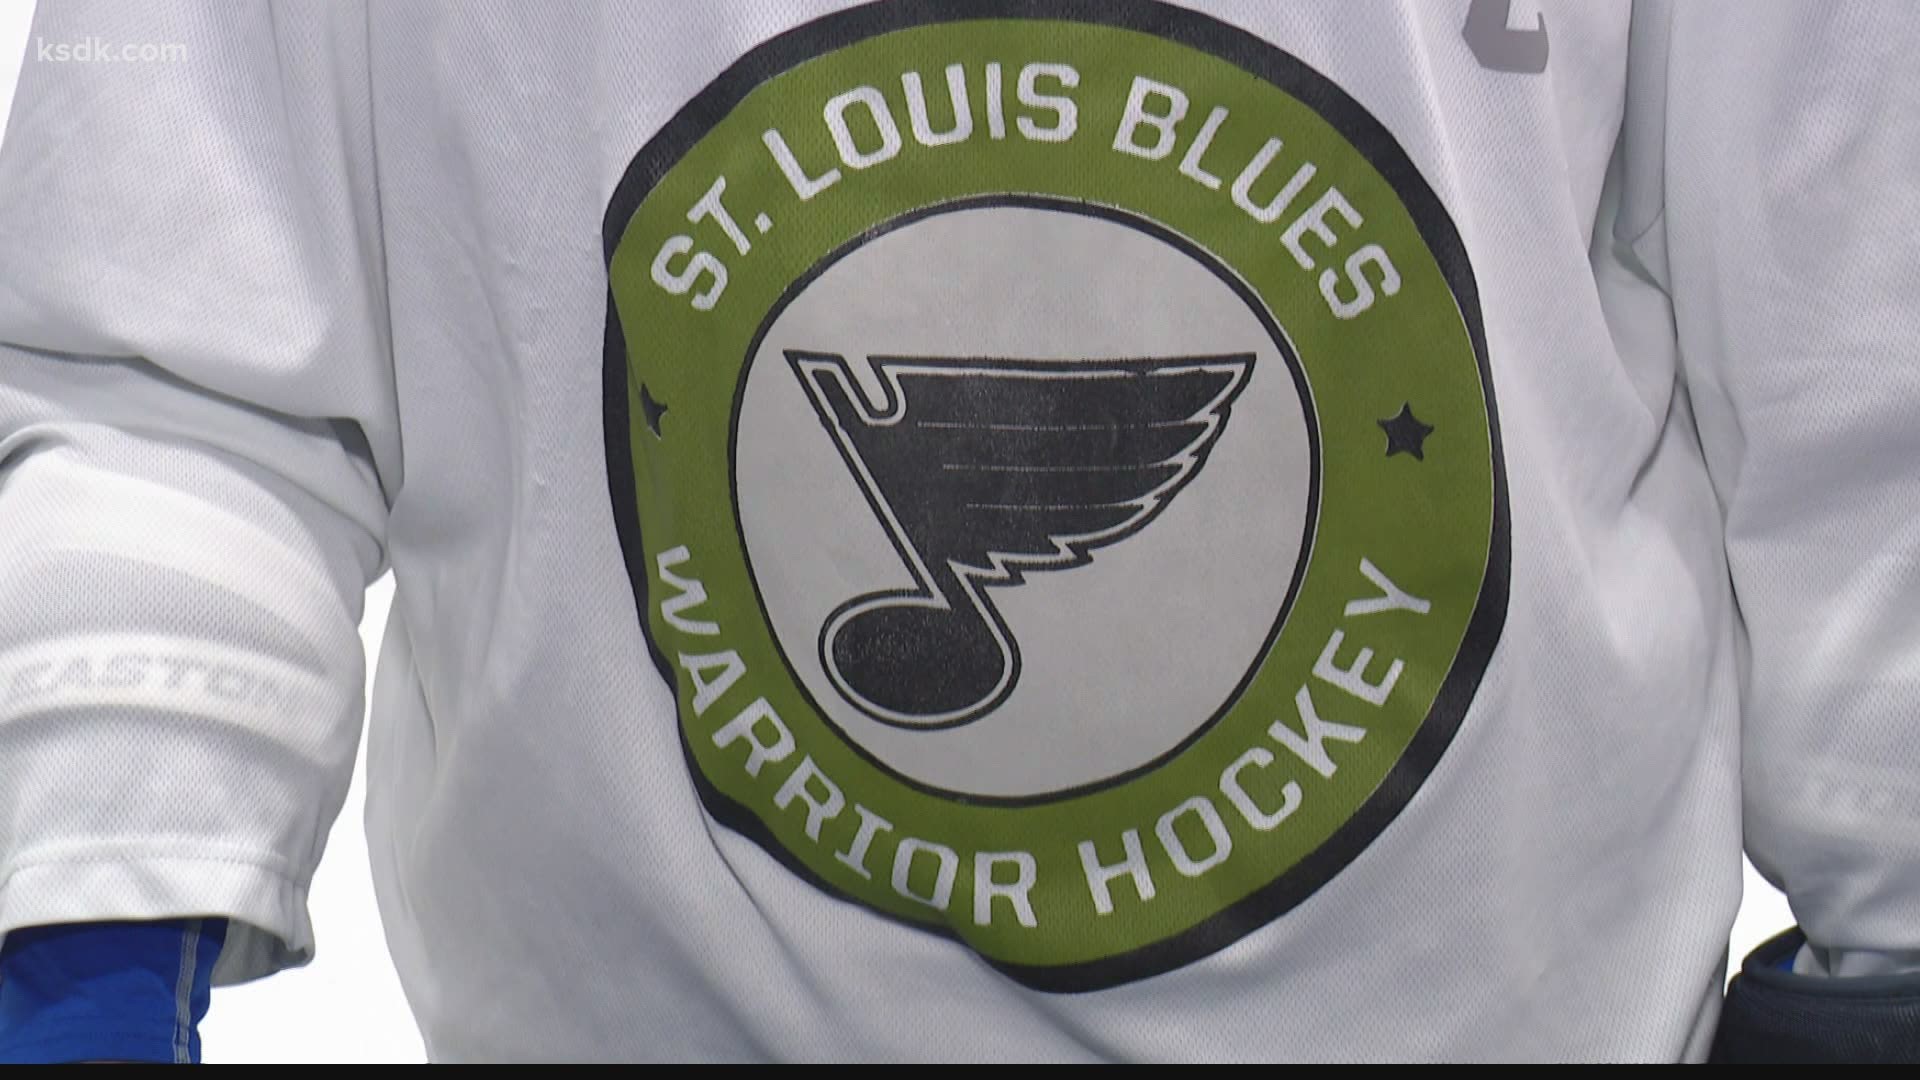 The St. Louis Blues Warriors have 100 players and four teams in the program.